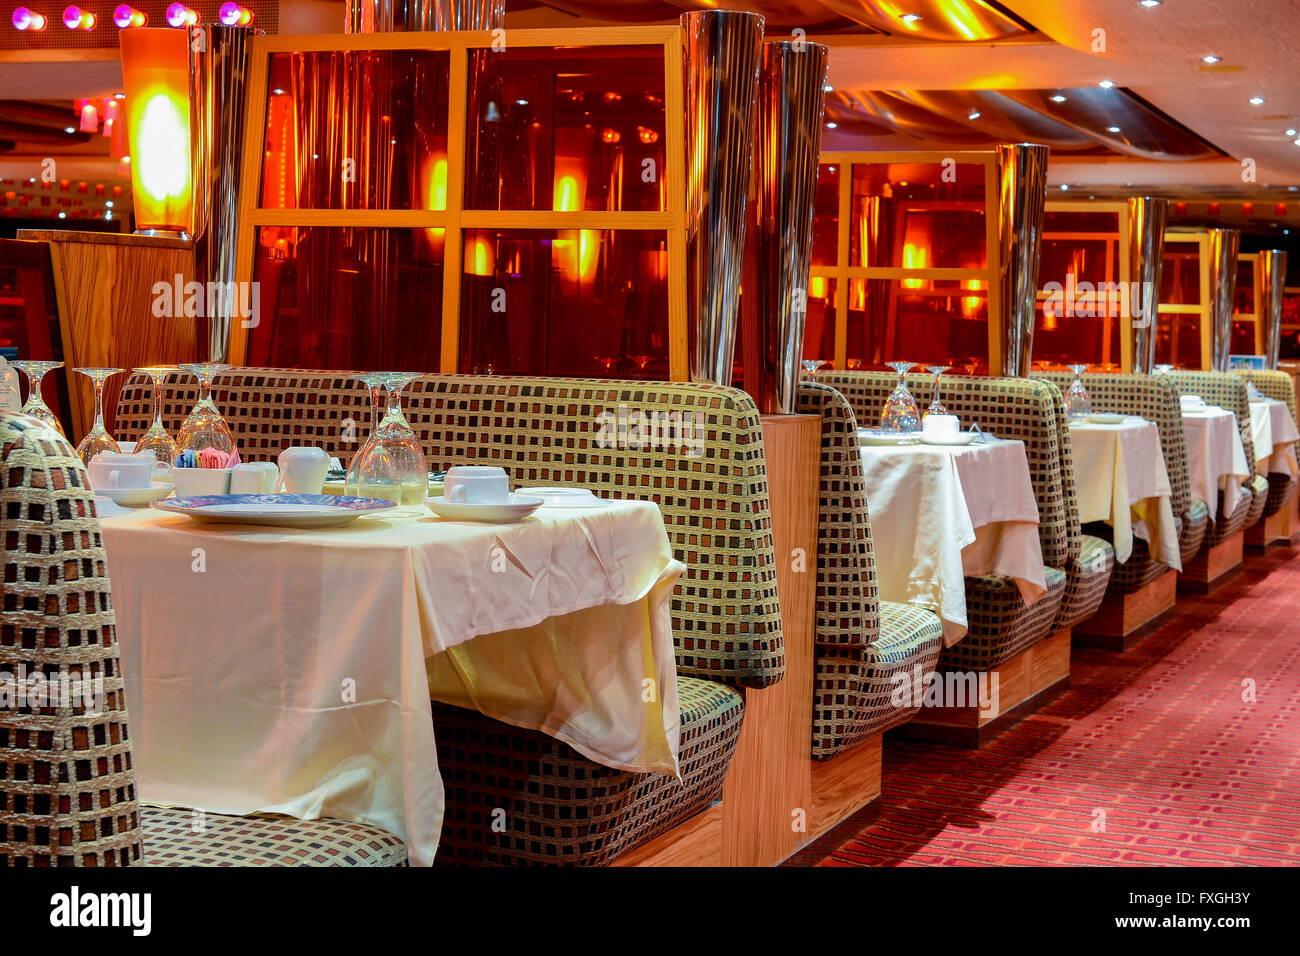 Interior restaurant cruise ship with table, plate and glasses Stock Photo